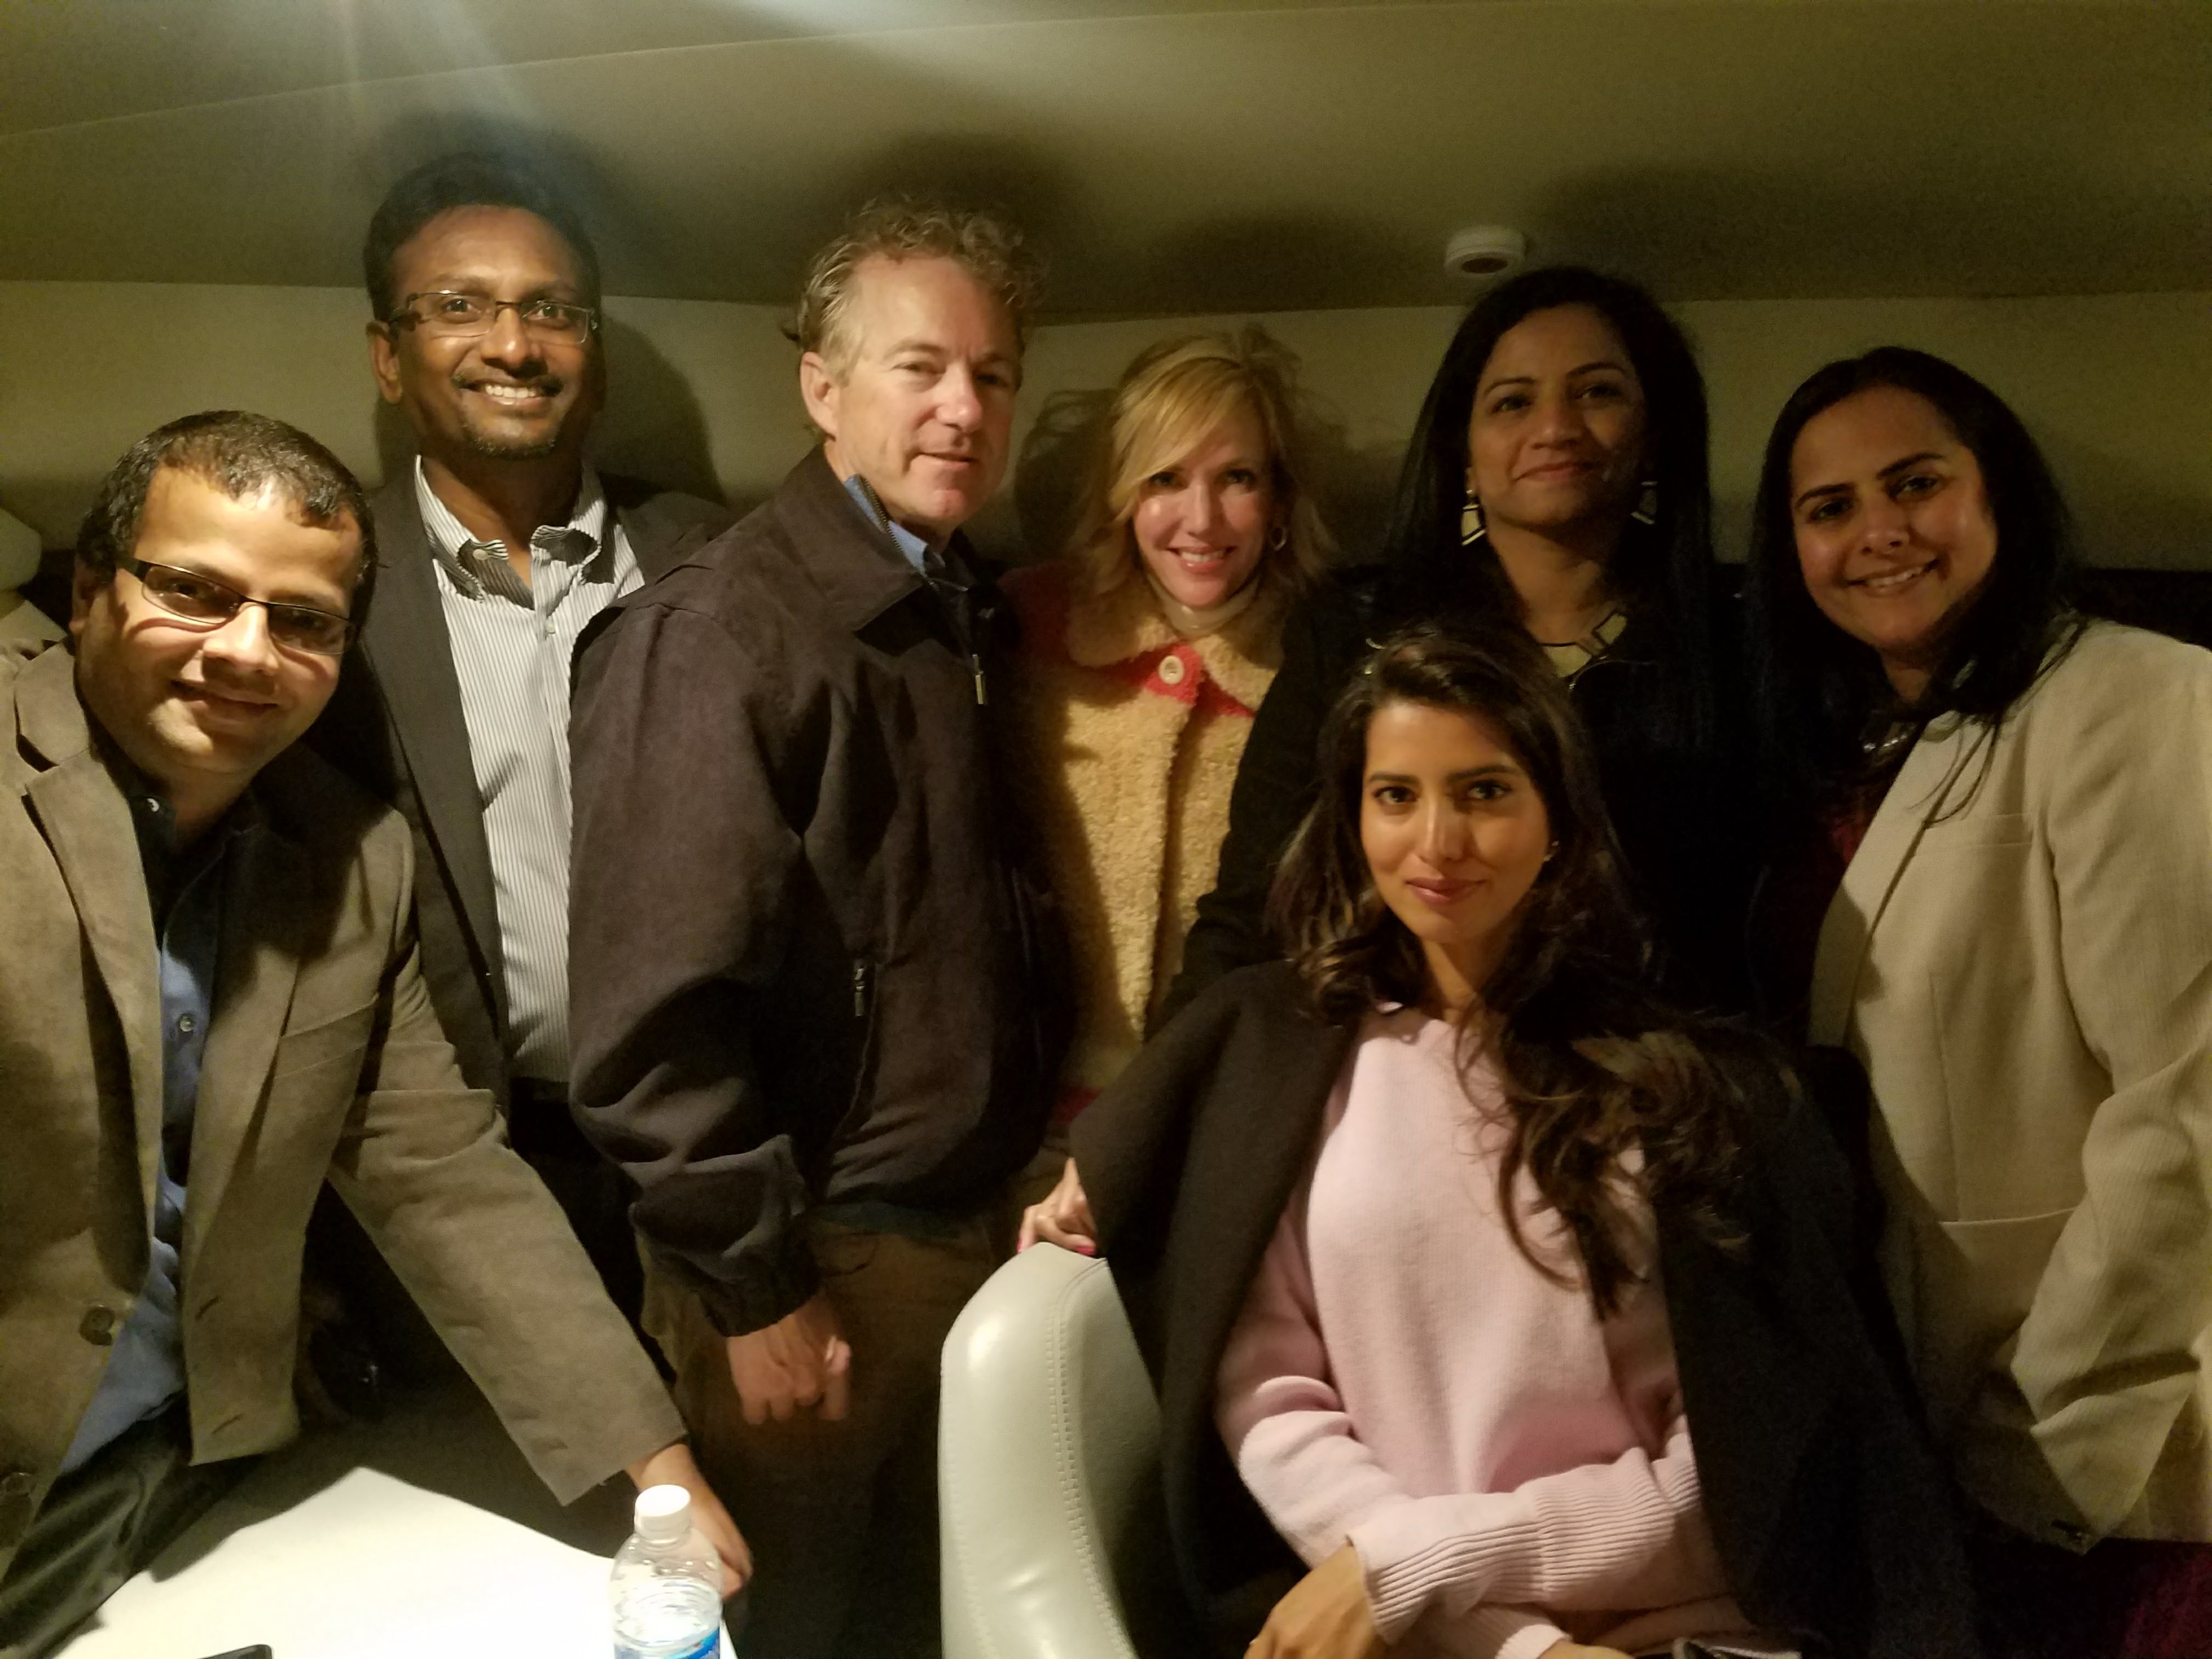 EXCLUSIVE: Sen. Rand Paul working with Republican Hindu Coalition to help those in green card limbo